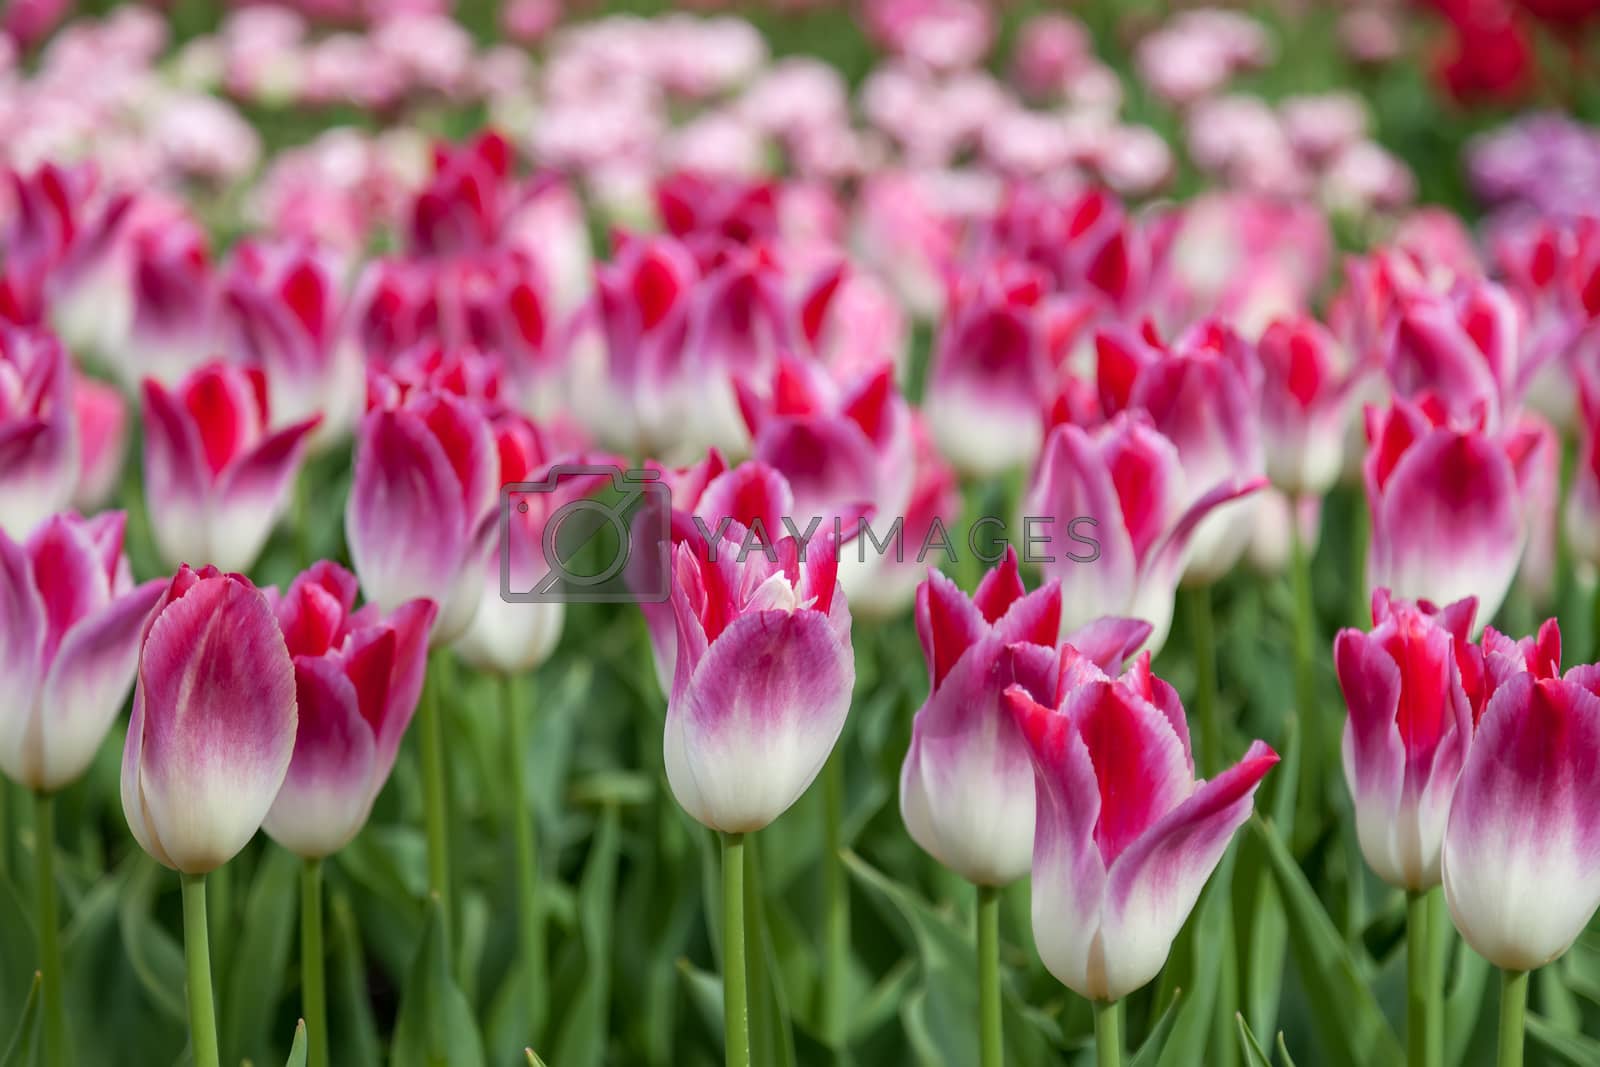 Royalty free image of Colorful Tulips by ninette_luz